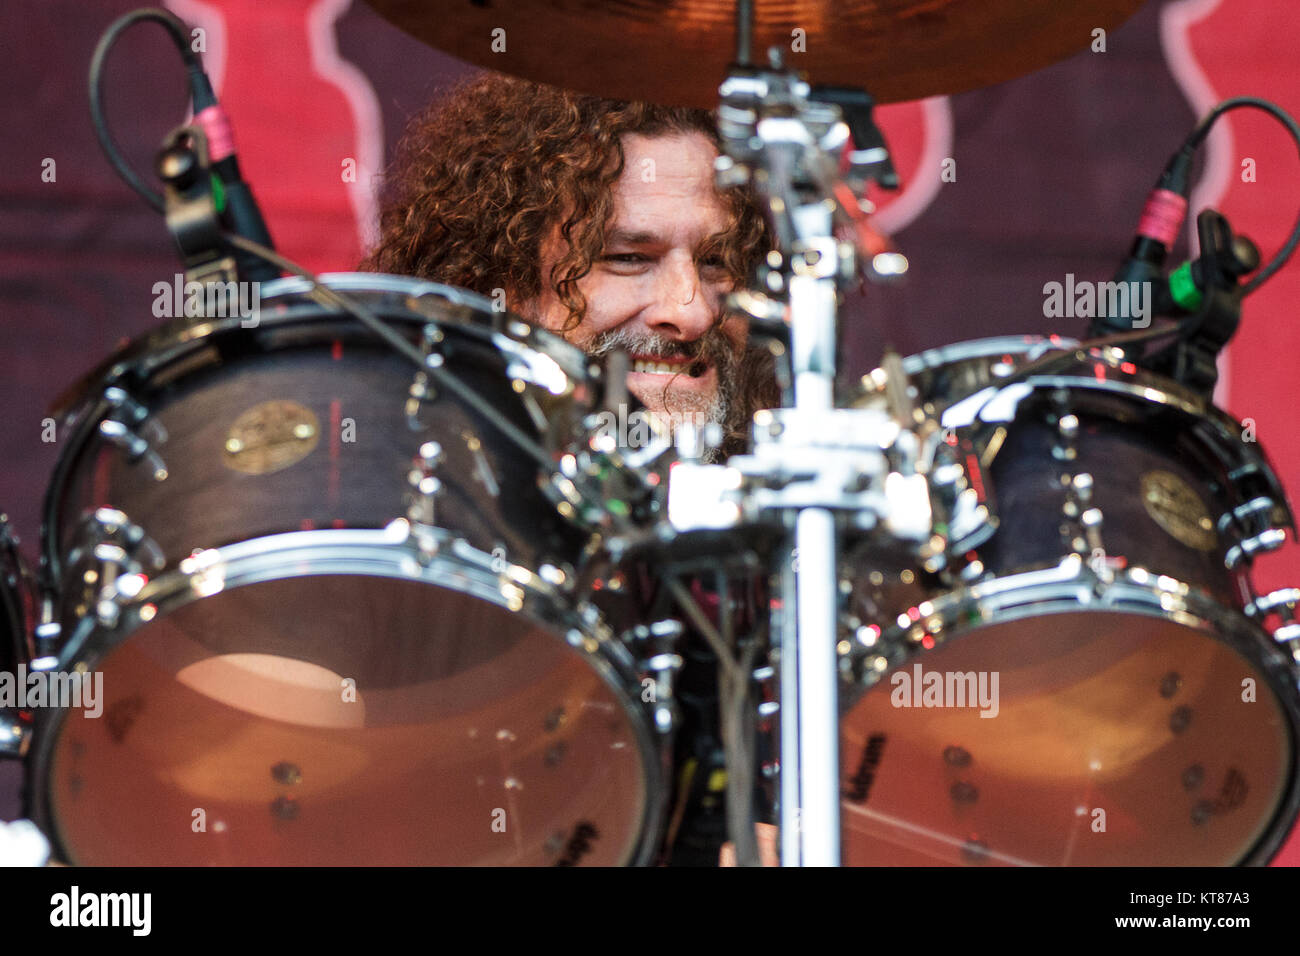 The American death metal band Cannibal Corpse performs a live concert at the Danish heavy metal festival Copenhell 2015 in Copenhagen. Here drummer Paul Mazurkiewicz is seen live on stage. Denmark, 18/06 2015. Stock Photo